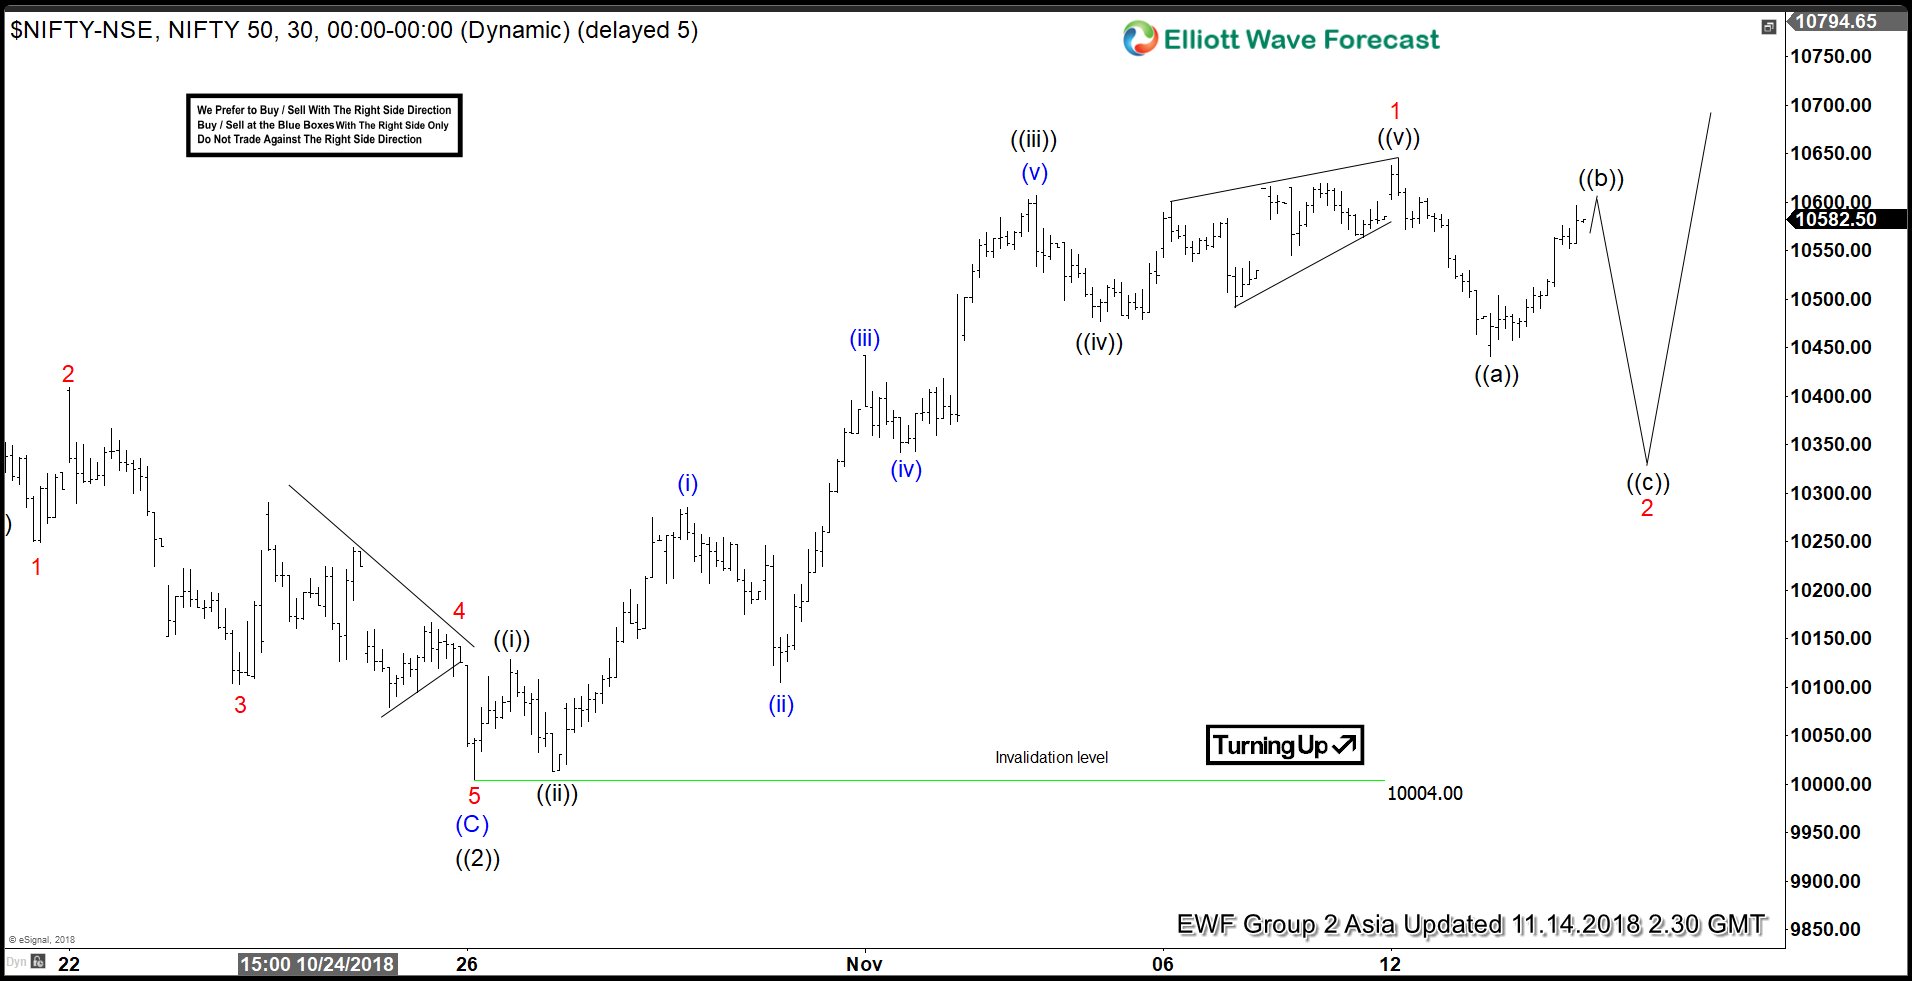 Elliott Wave View: Nifty looking to resume rally